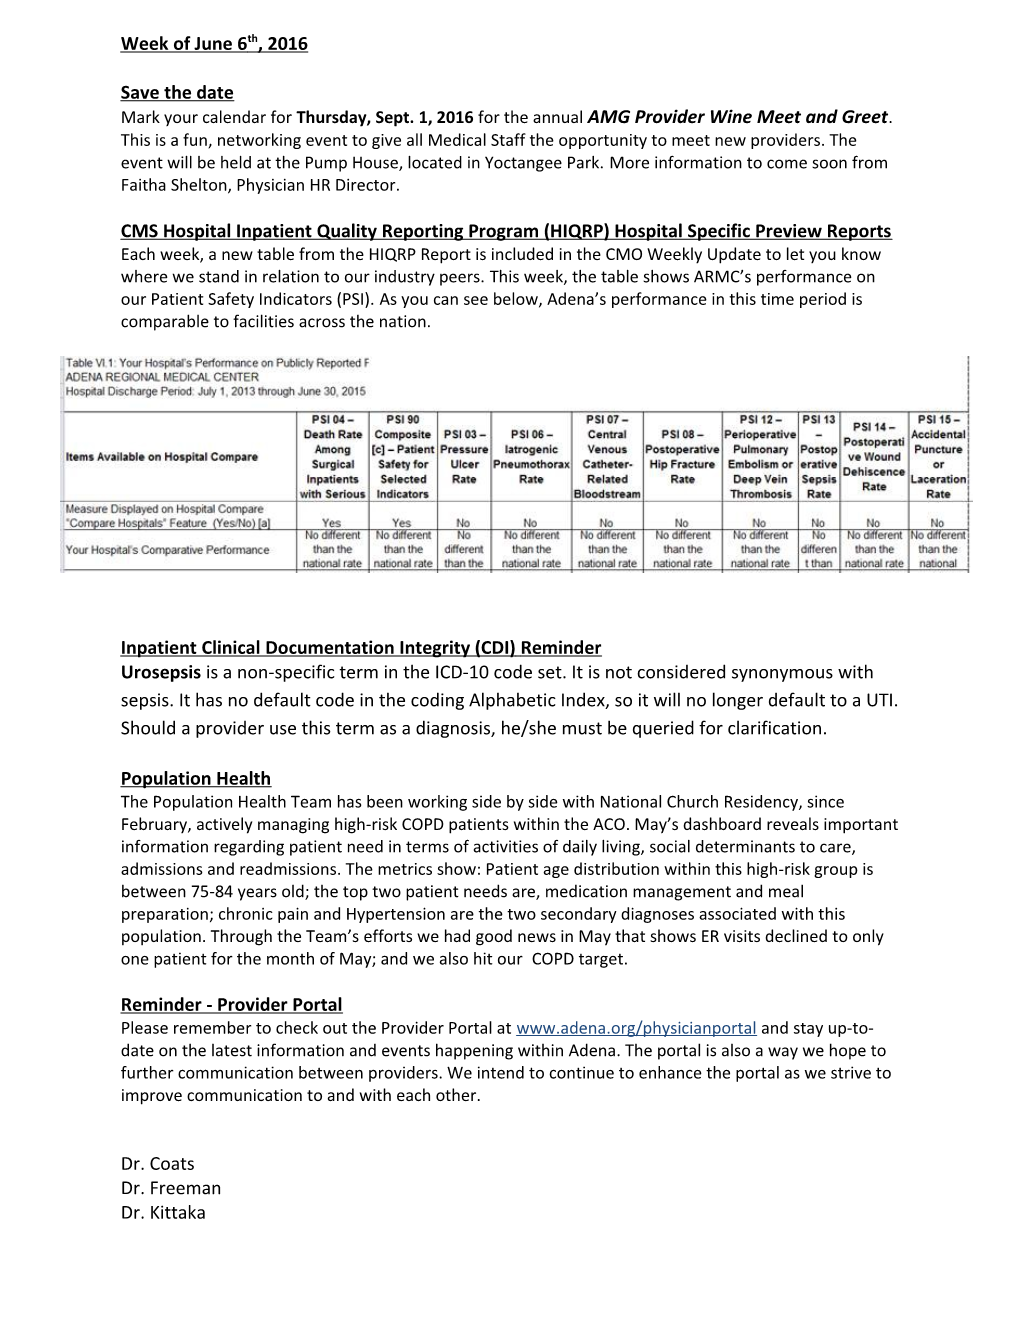 CMS Hospital Inpatient Quality Reporting Program (HIQRP) Hospital Specific Preview Reports